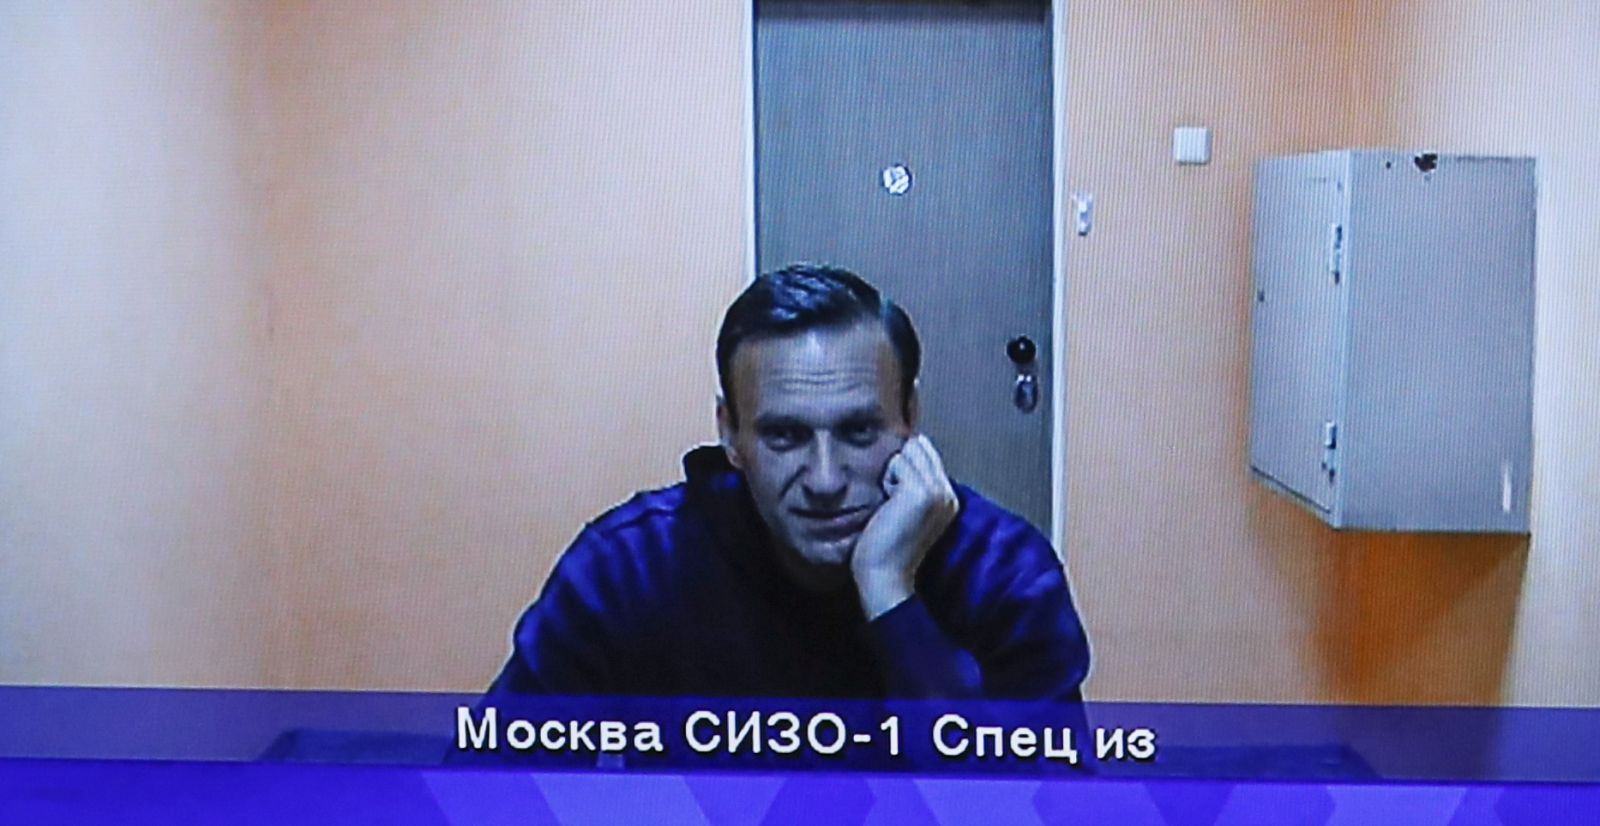 epa08970902 Opposition leader Alexei Navalny is shown on a monitor screen during a hearing of an appeal against the detention in Moscow Region Court in Krasnogorsk outside Moscow, Russia, 28 January 2021. Alexei Navalny was detained after his arrival to Moscow from Germany on 17 January 2021. A Moscow judge on 18 January ruled that he will remain in custody for 30 days following his airport arrest.  EPA/YURI KOCHETKOV